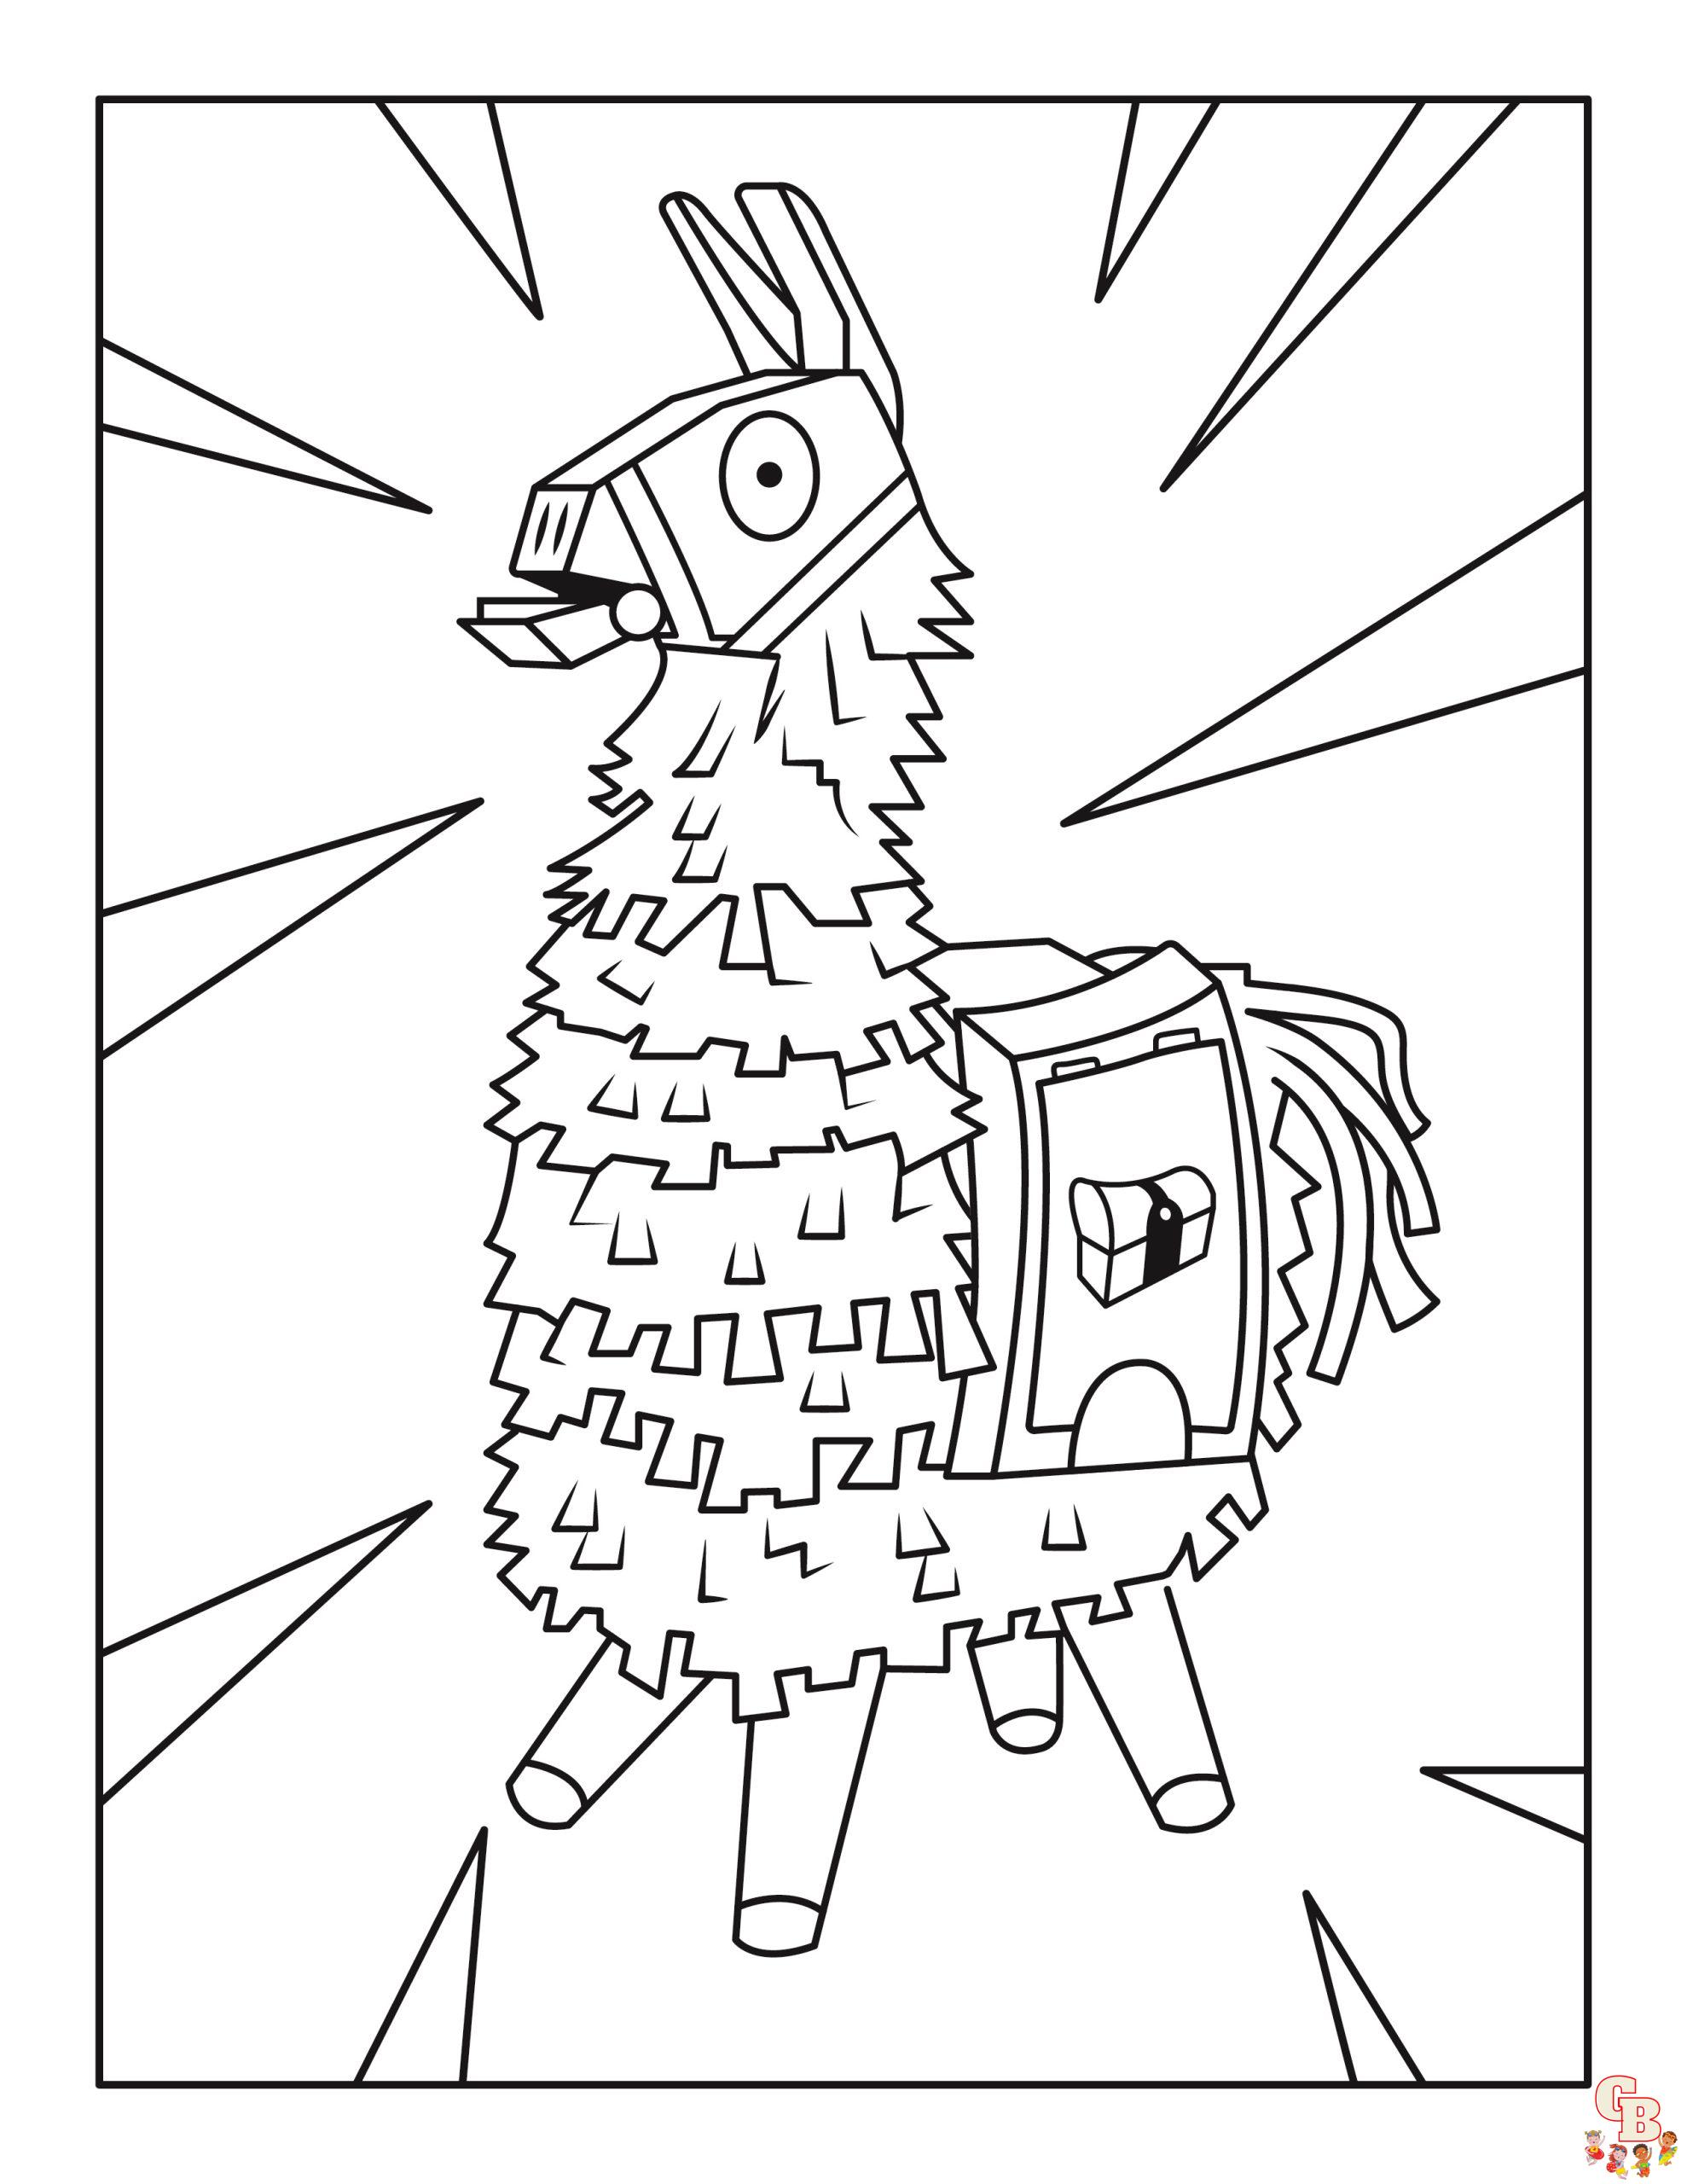 Fun Coloring Pages 3